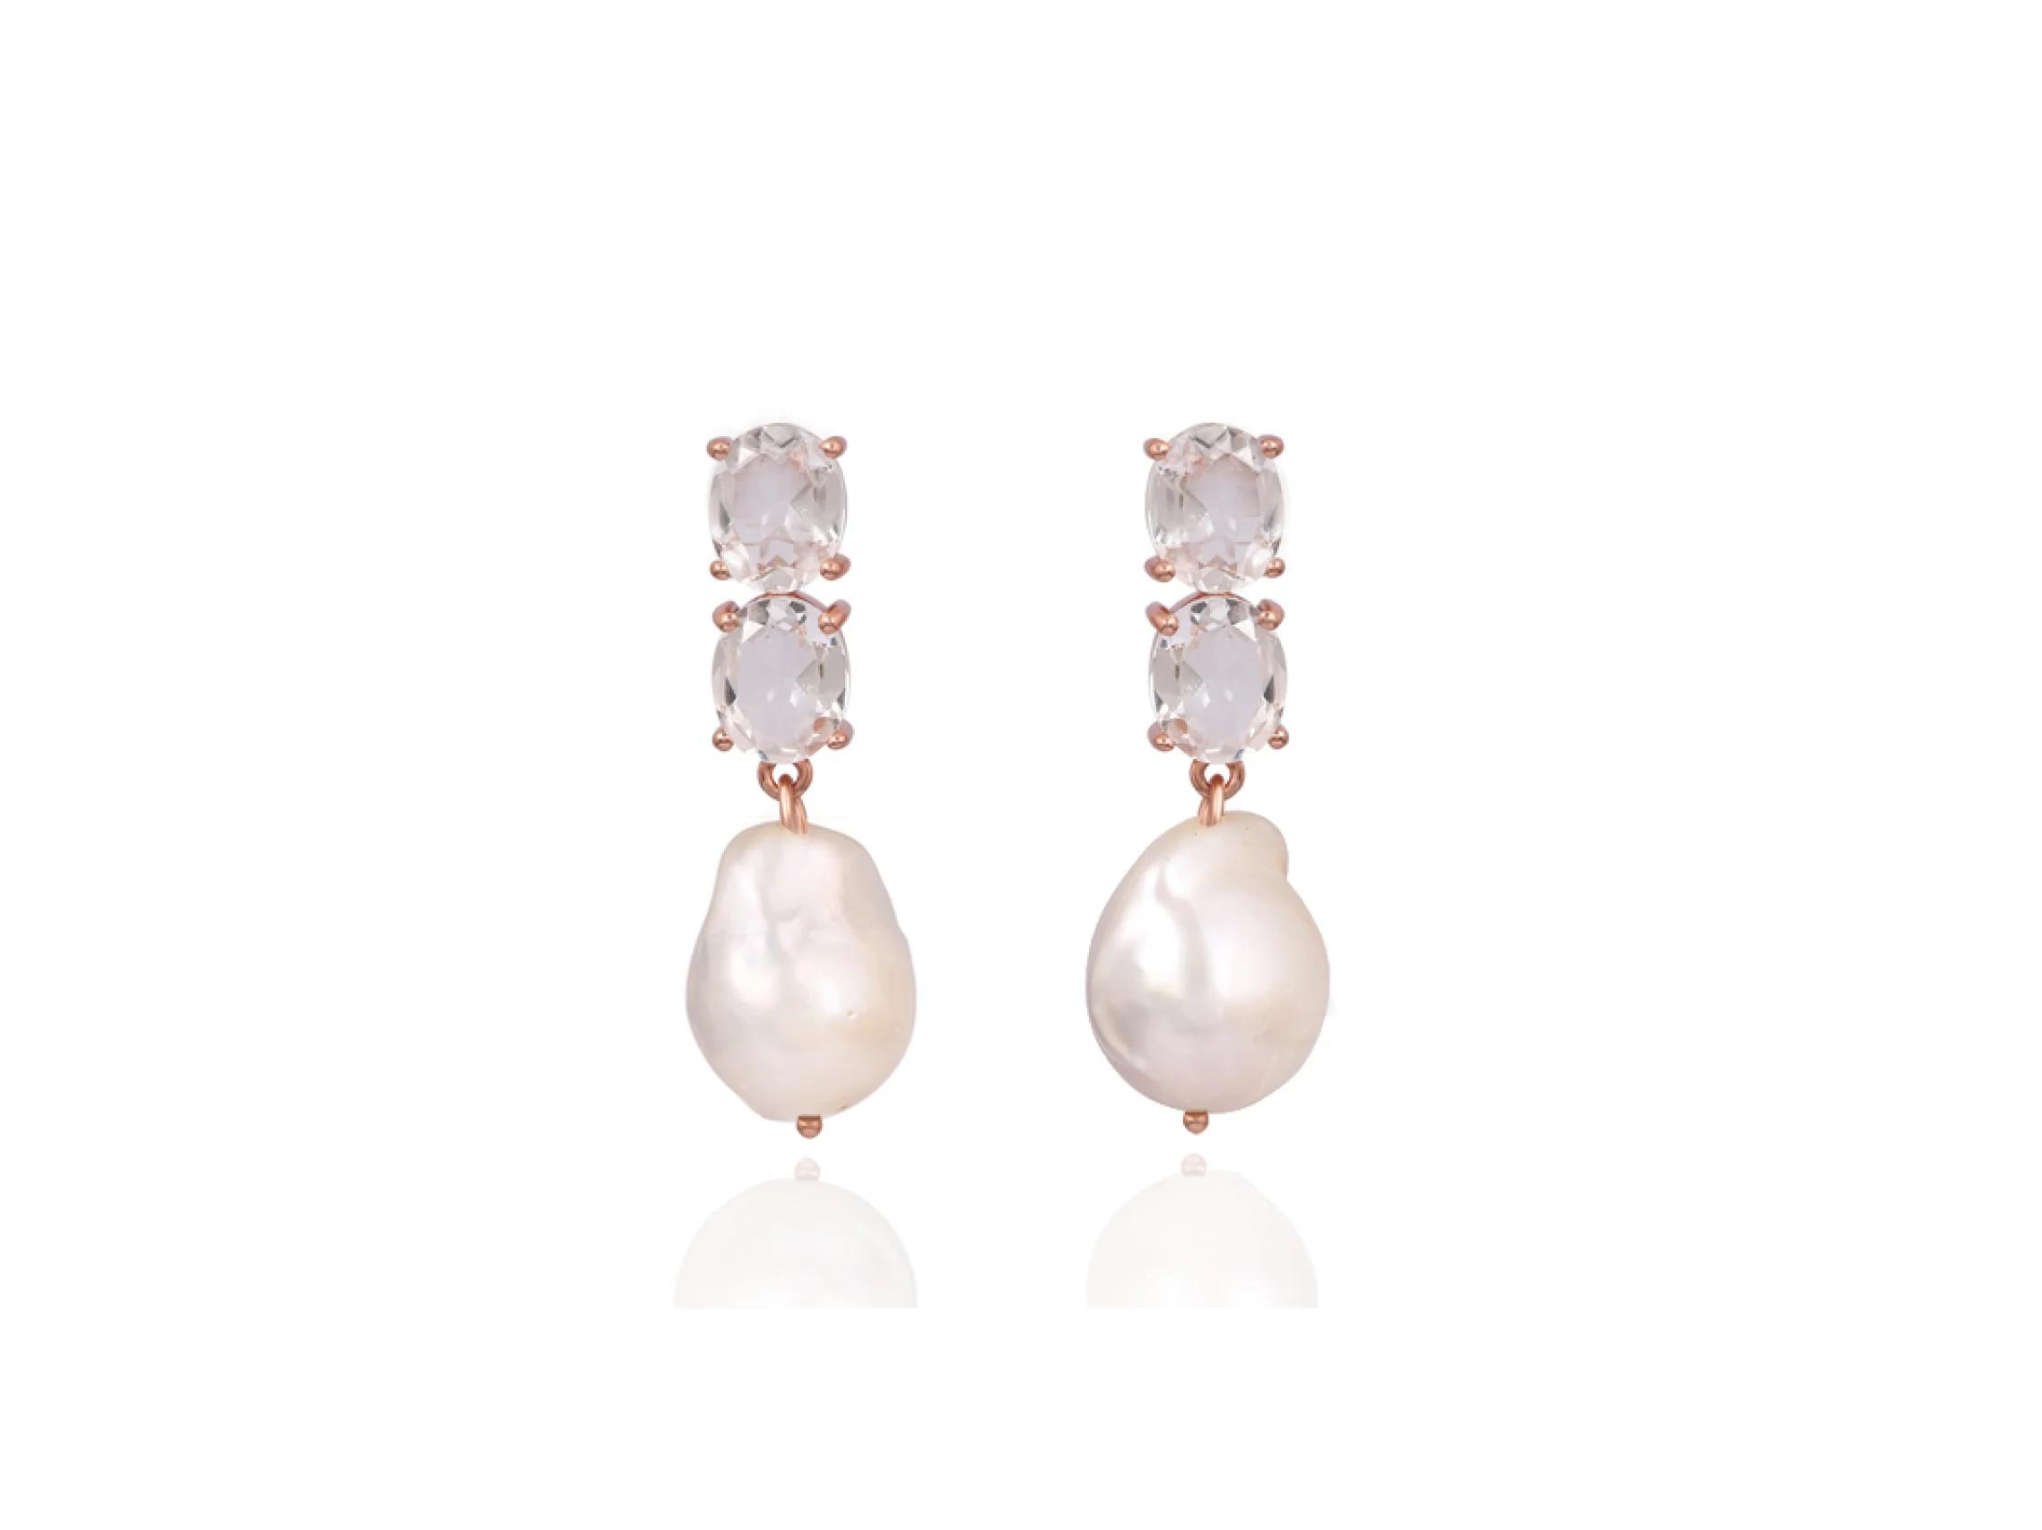 Lola Knight - Ayla - Large Pearl & Crystal Earrings - Rose Gold